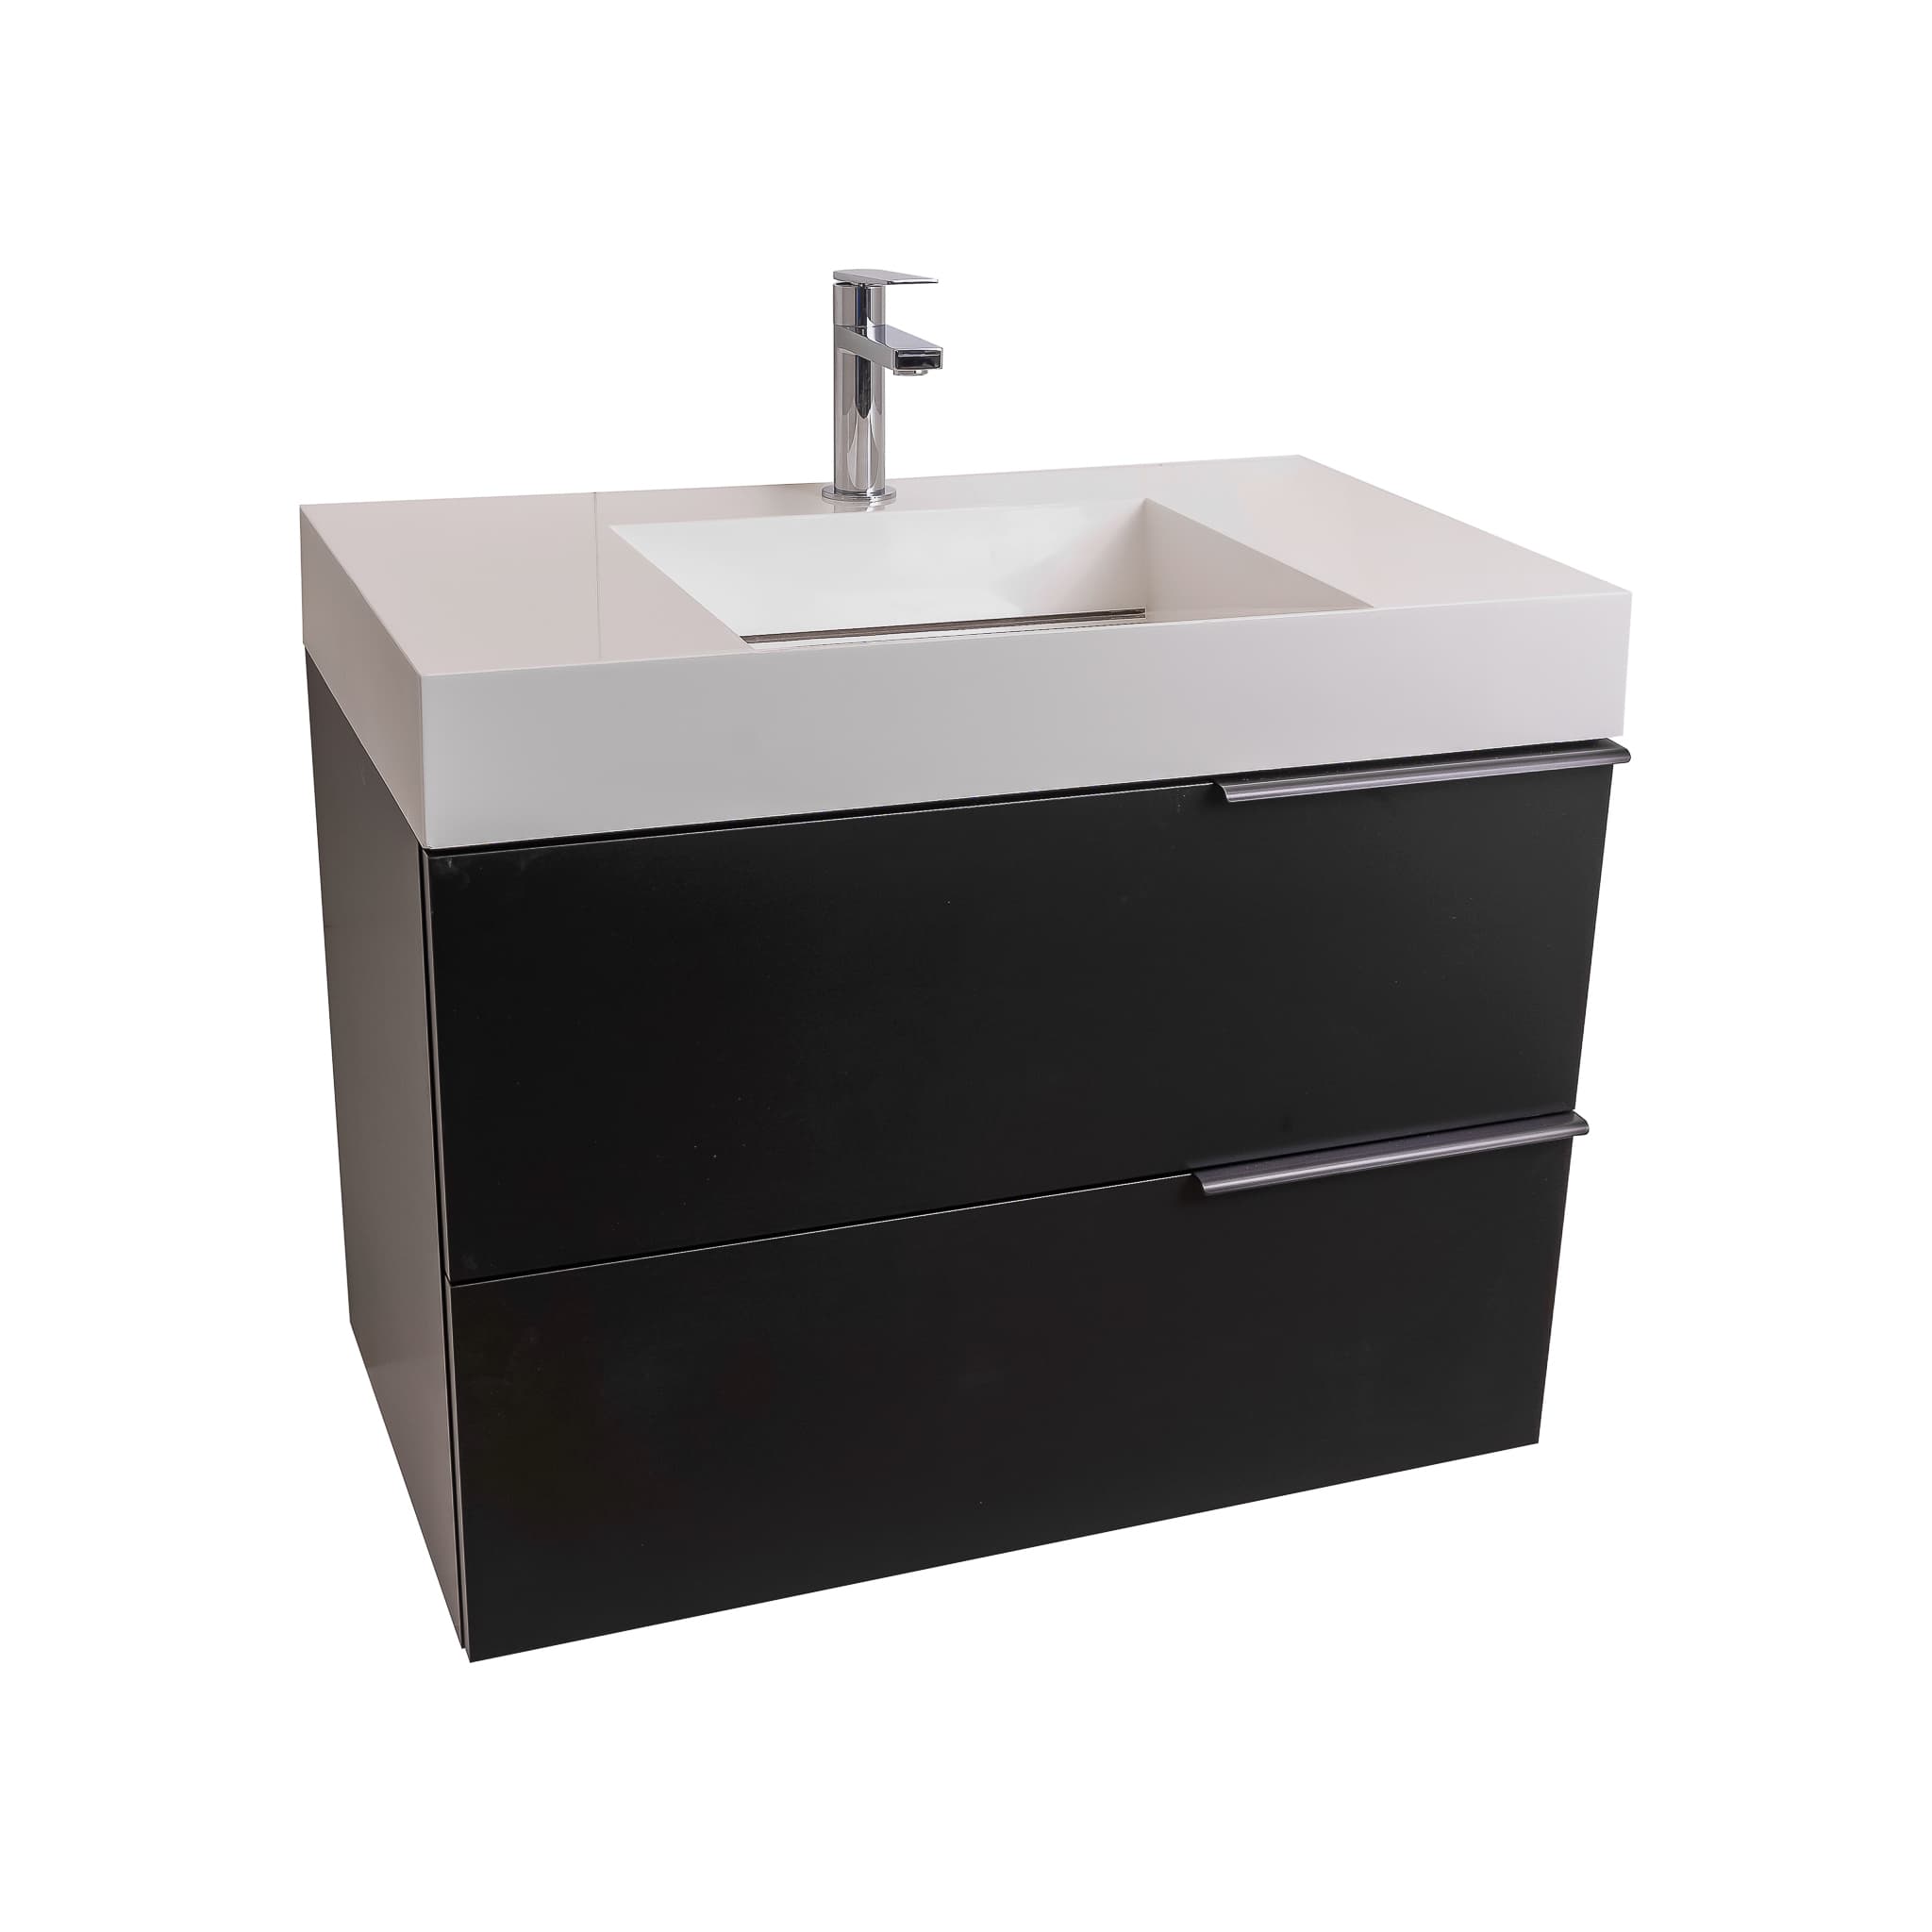 Mallorca 39.5 Matte Black Cabinet, Infinity Cultured Marble Sink, Wall Mounted Modern Vanity Set